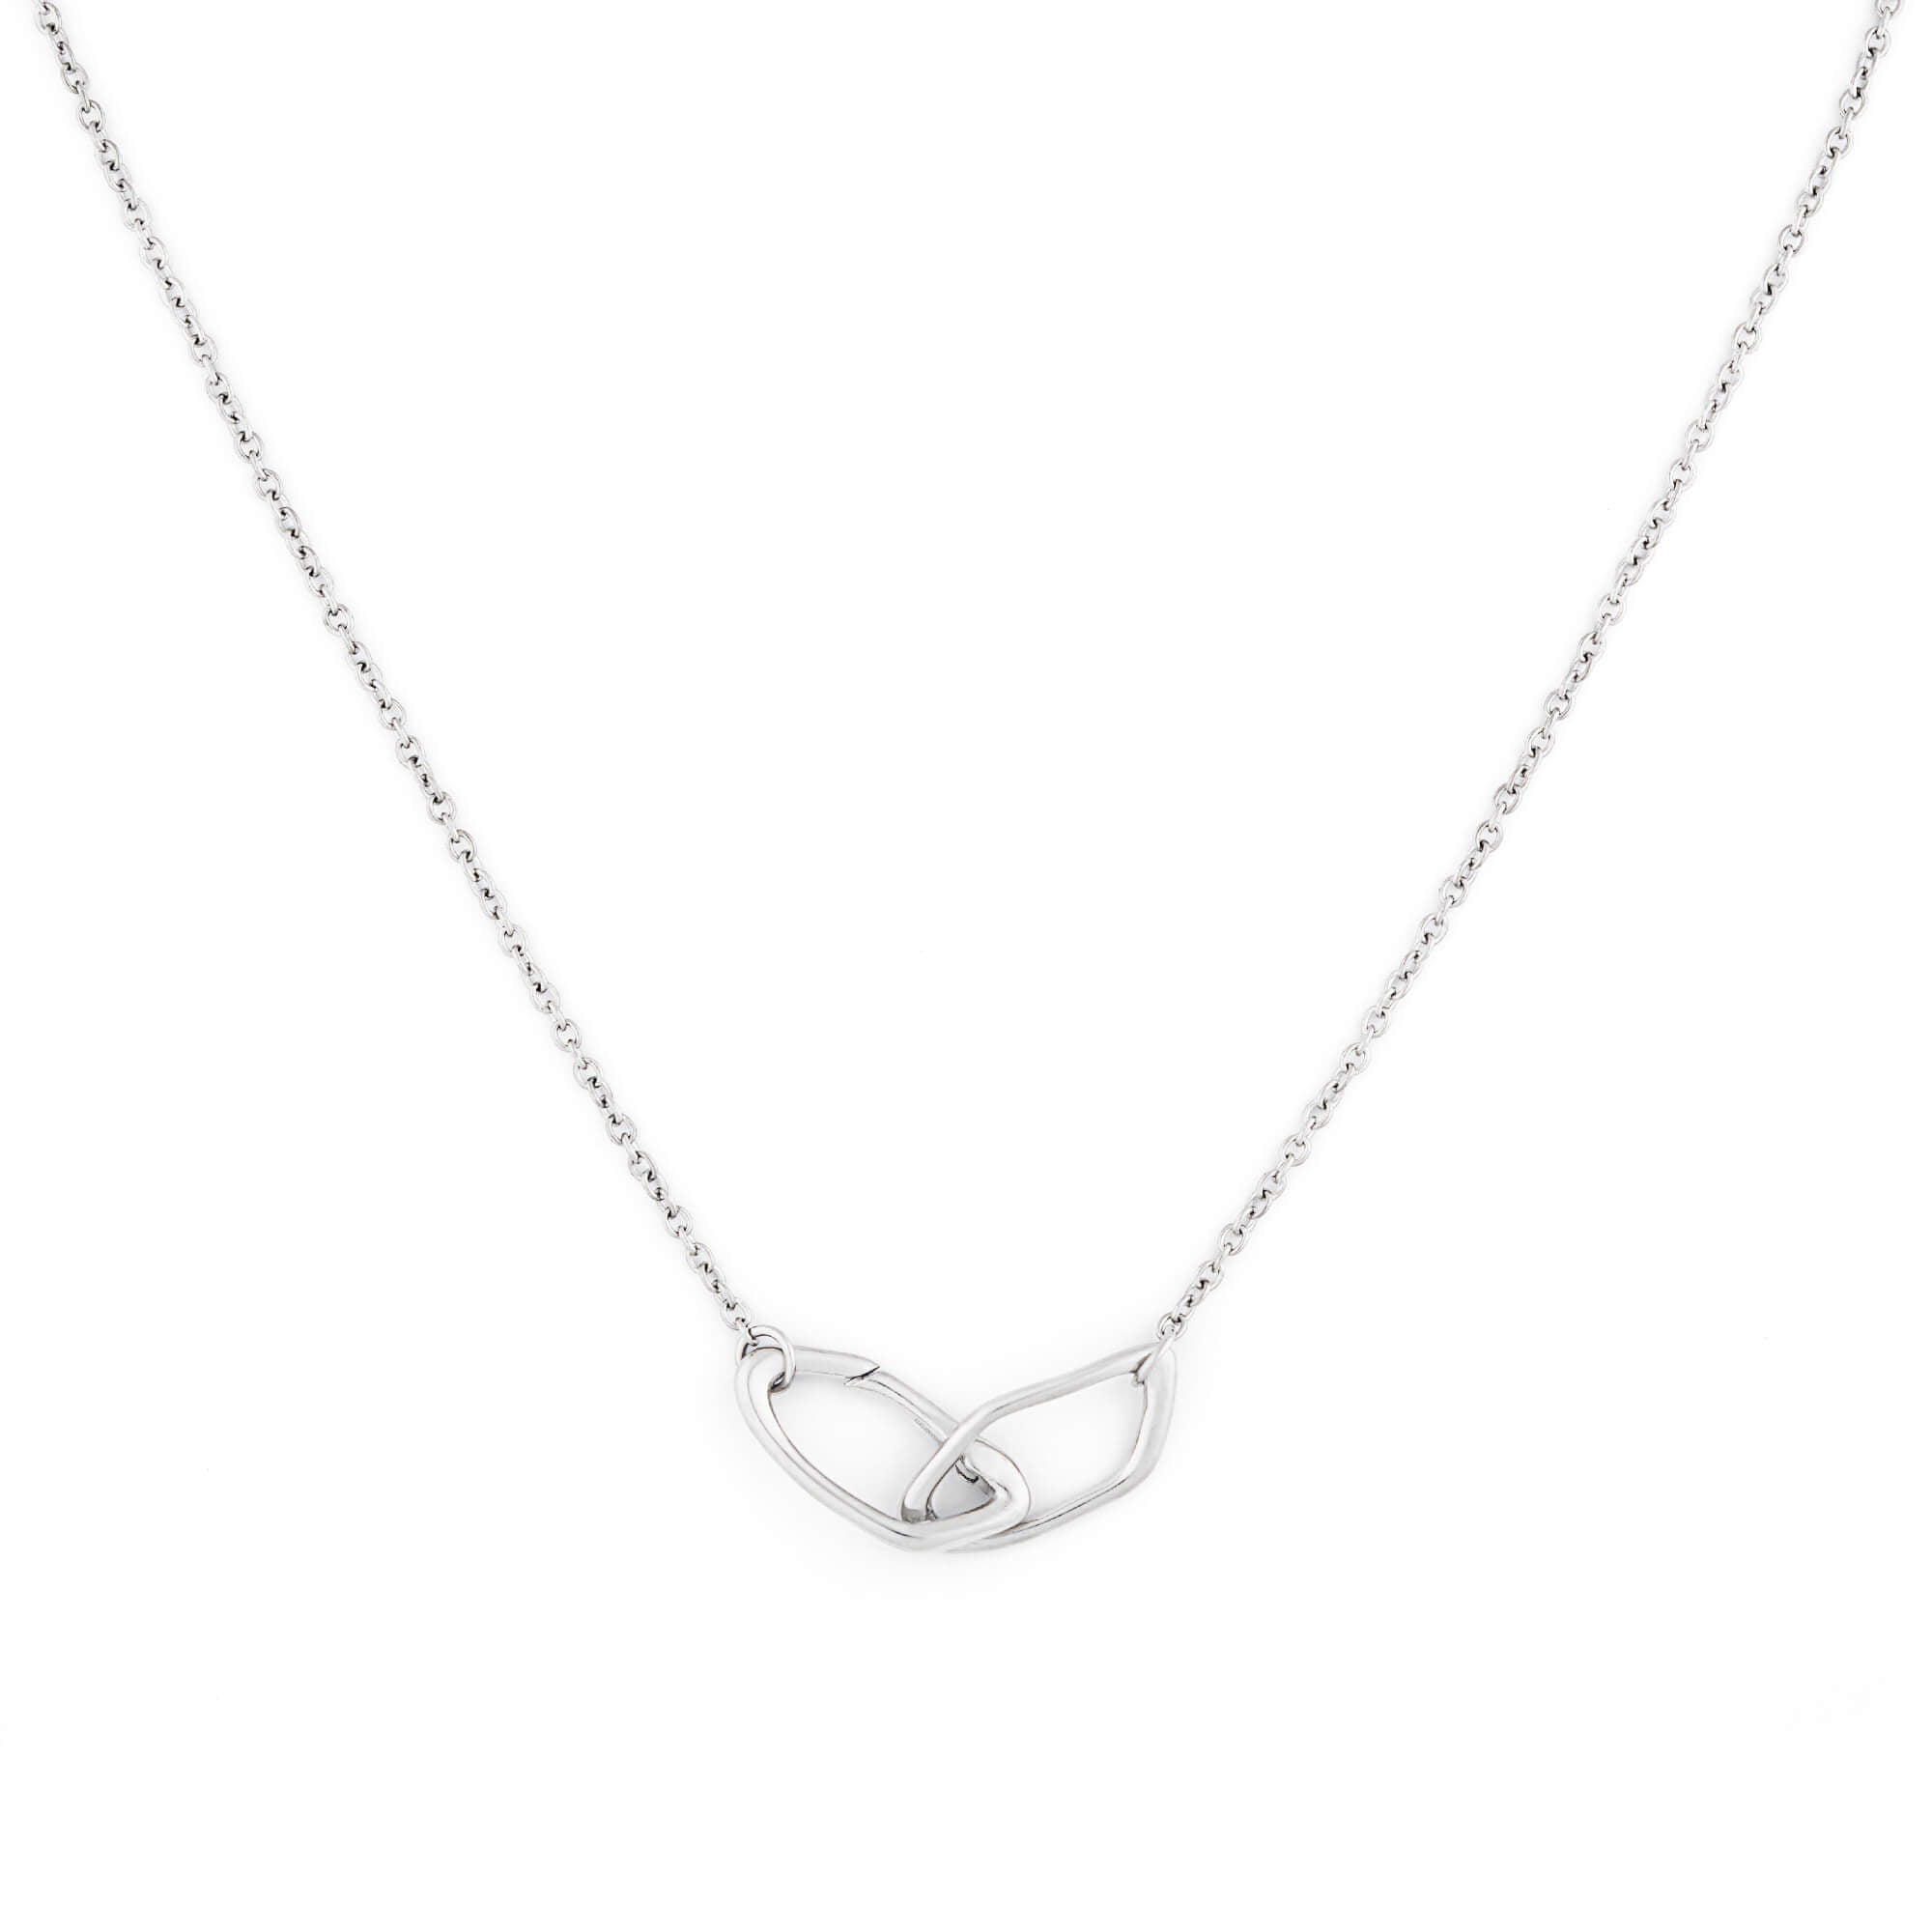 Dusk women's necklace by Five Jwlry, part of Alicia Moffet's collaboration. The necklace showcases a pendant with two organically crisscrossed hoops, cleverly incorporating the clasp. Paired with a fine 2mm cable chain, available in 14k gold or silver, crafted from water-resistant 316L stainless steel. Hypoallergenic with a 2-year warranty.